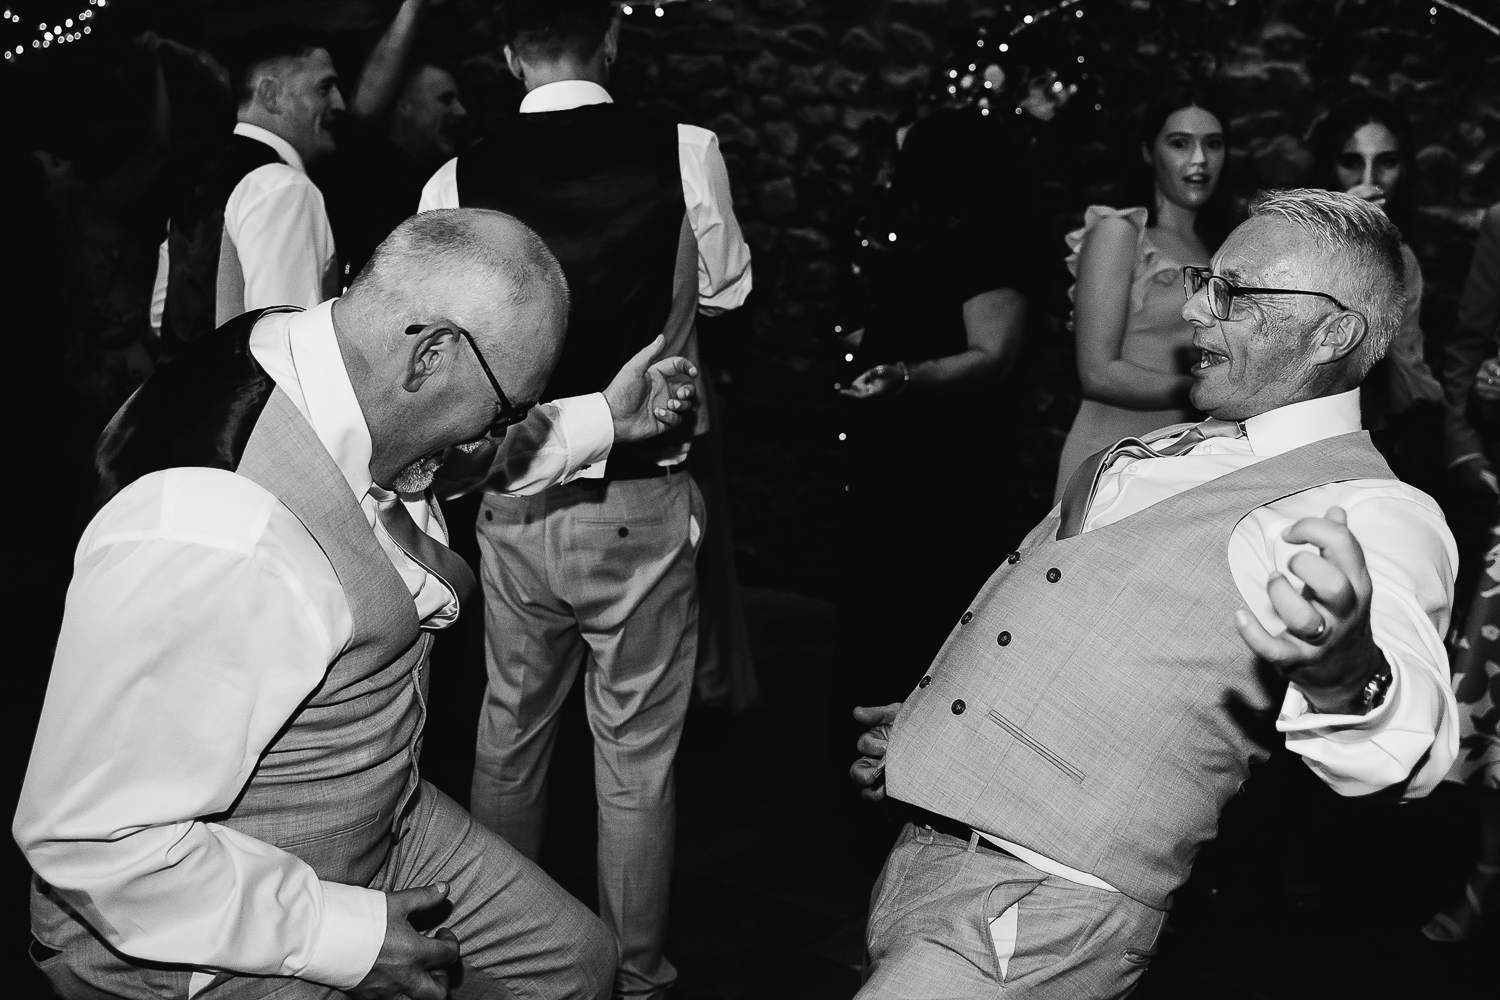 Two fathers dancing together